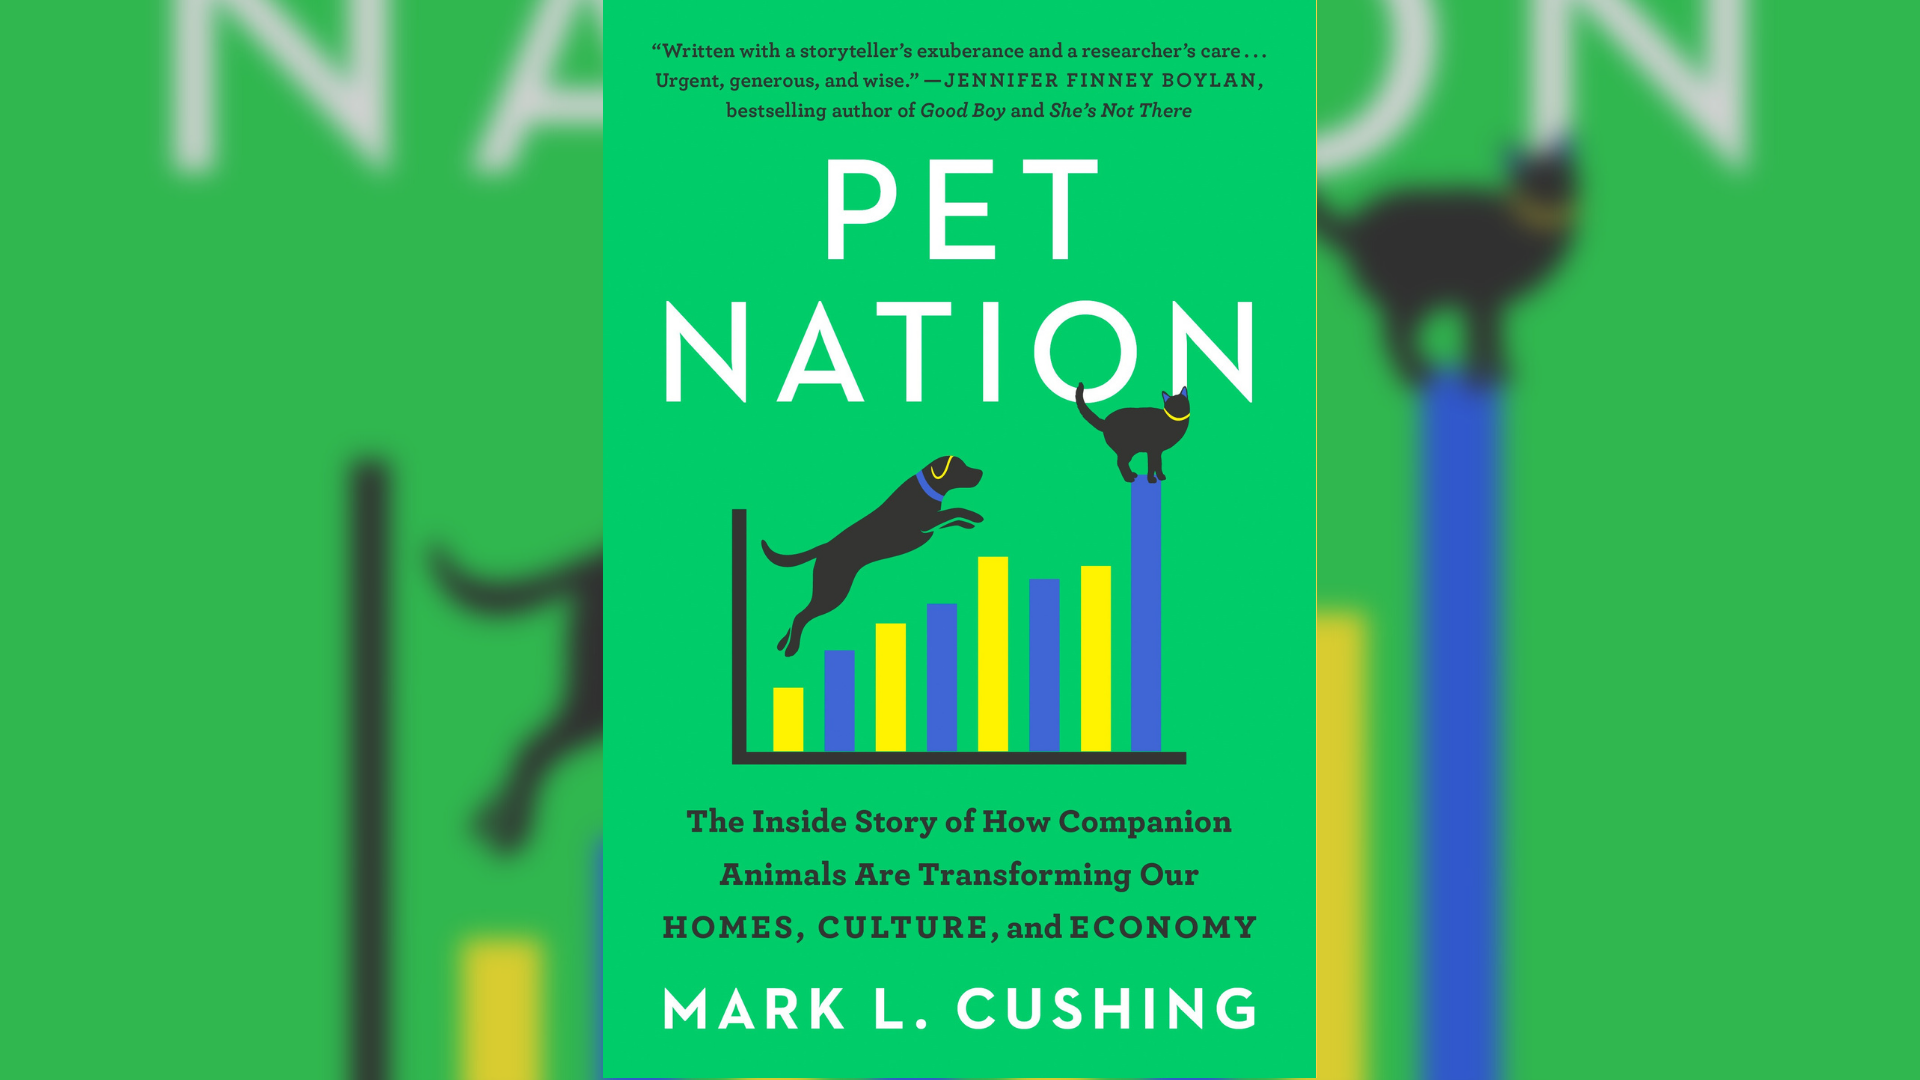 "Pet Nation" by Mark Cushing examines how our love for animals has changed our lives socially, culturally, and economically. #newdaynw